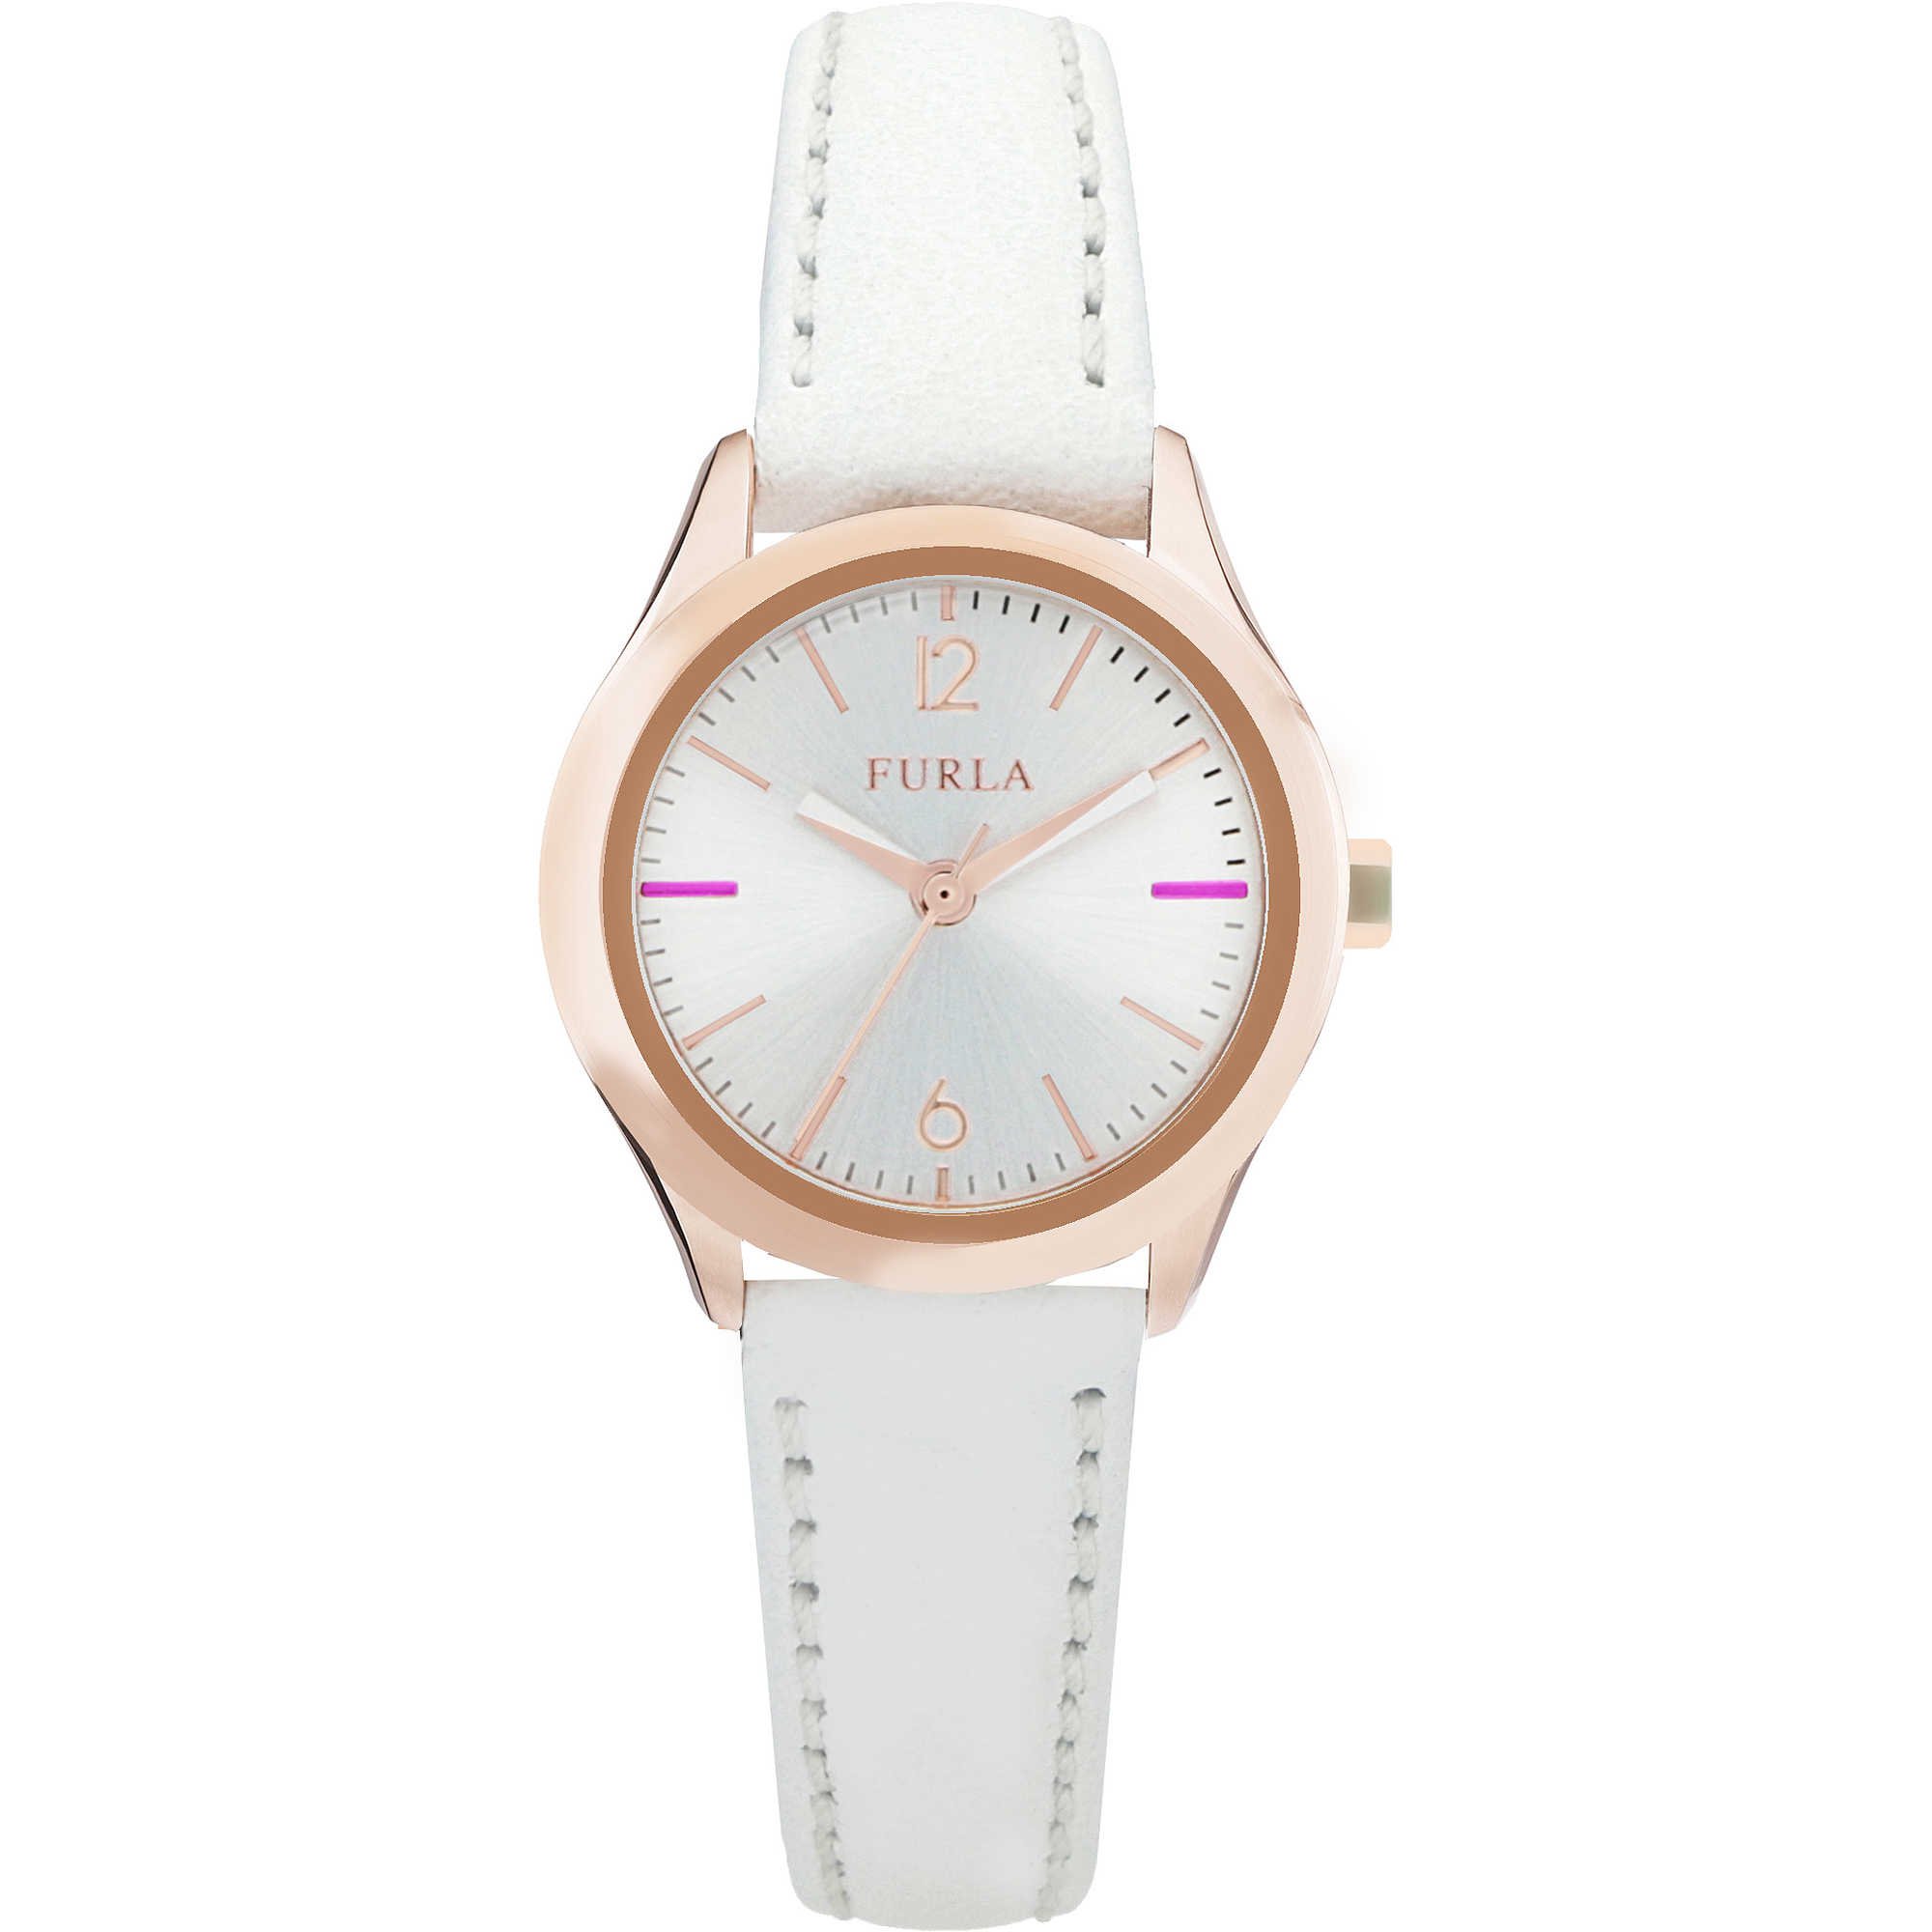 Furla Women's Stainless Steel Quartz Watch with Leather Strap, White, 13 (Model: R4251101505)